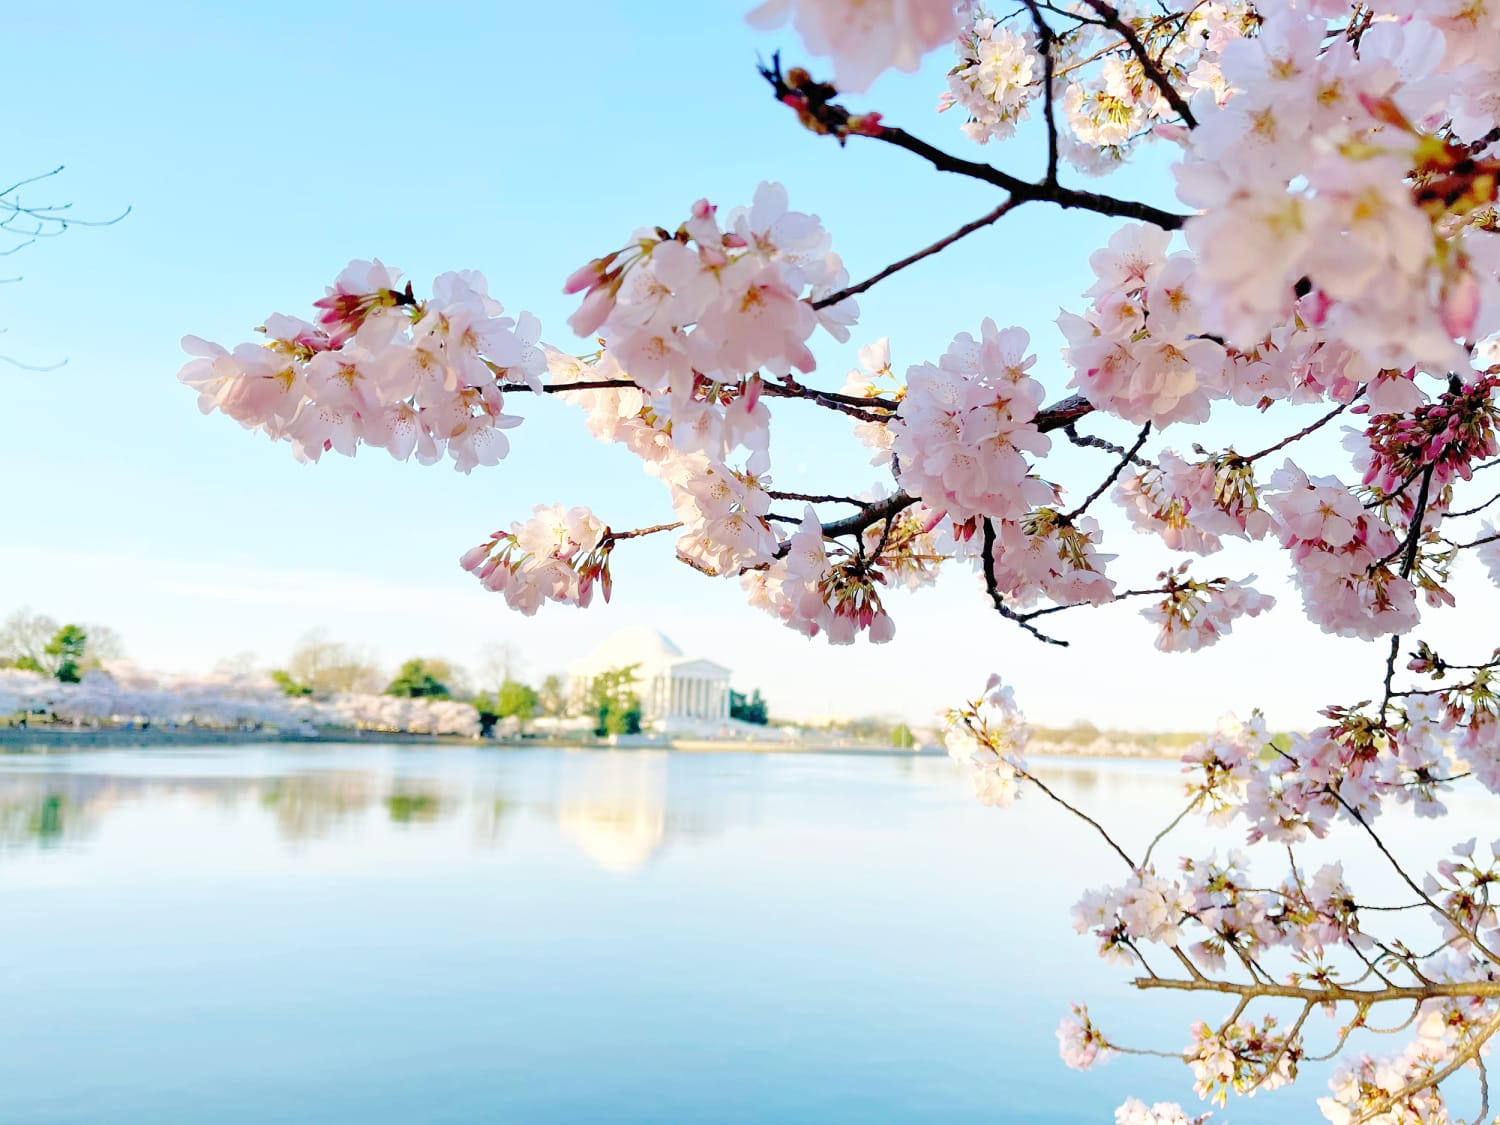 https://media-cldnry.s-nbcnews.com/image/upload/rockcms/2023-02/when-do-the-cherry-blossoms-bloom-in-dc-2-te-230222-7eb640.jpg